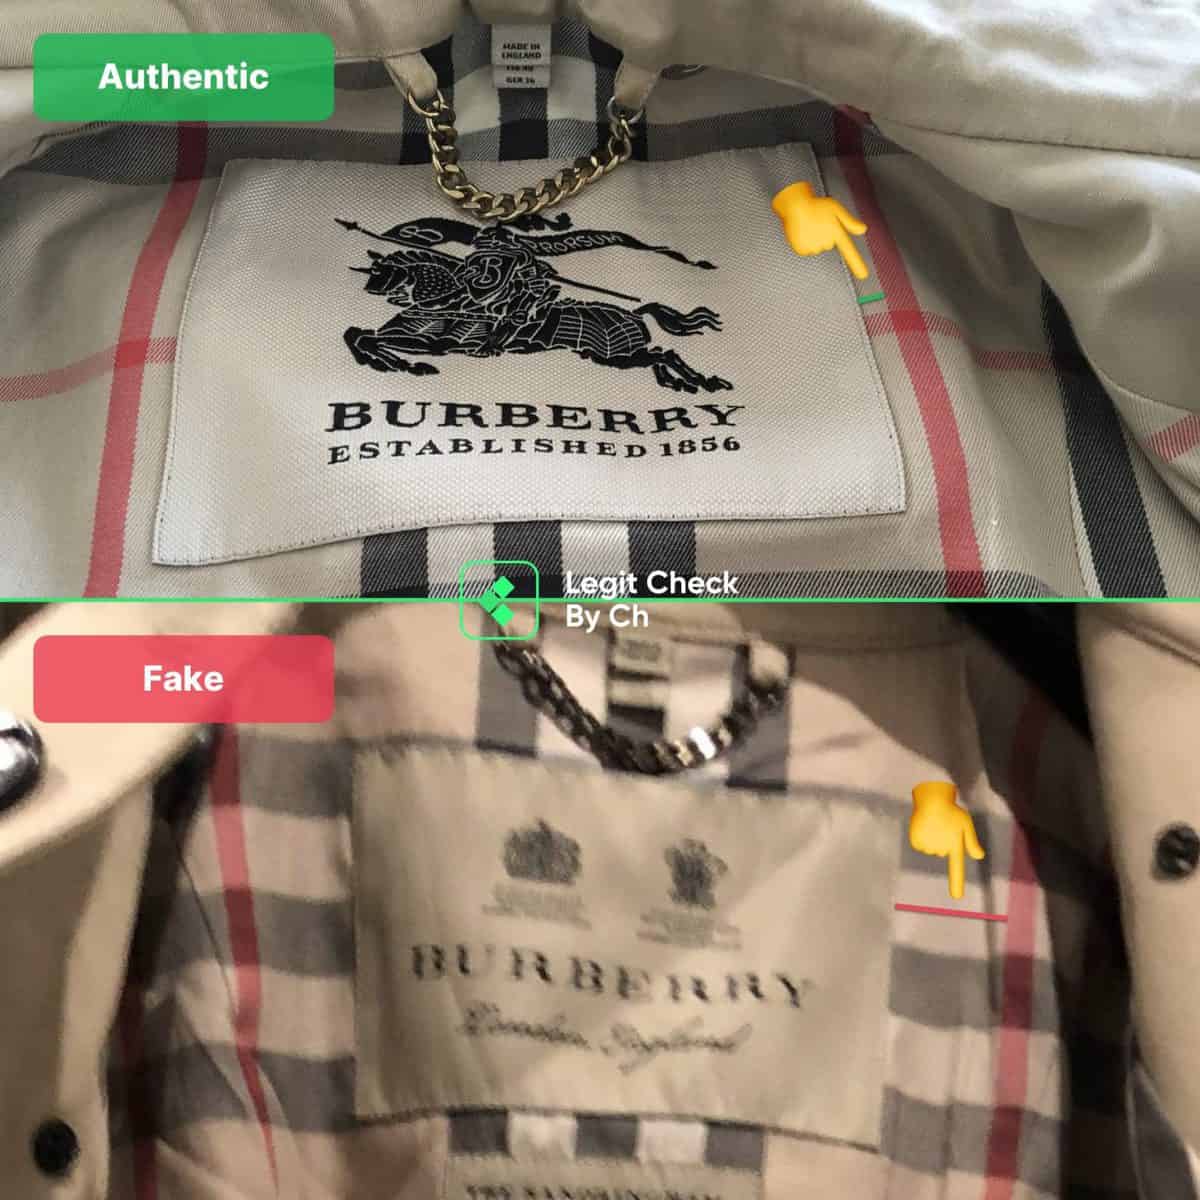 How To Spot Fake Burberry Coats In 2021 - Fake Vs Real Burberry Trench Coat Guide - Legit Check